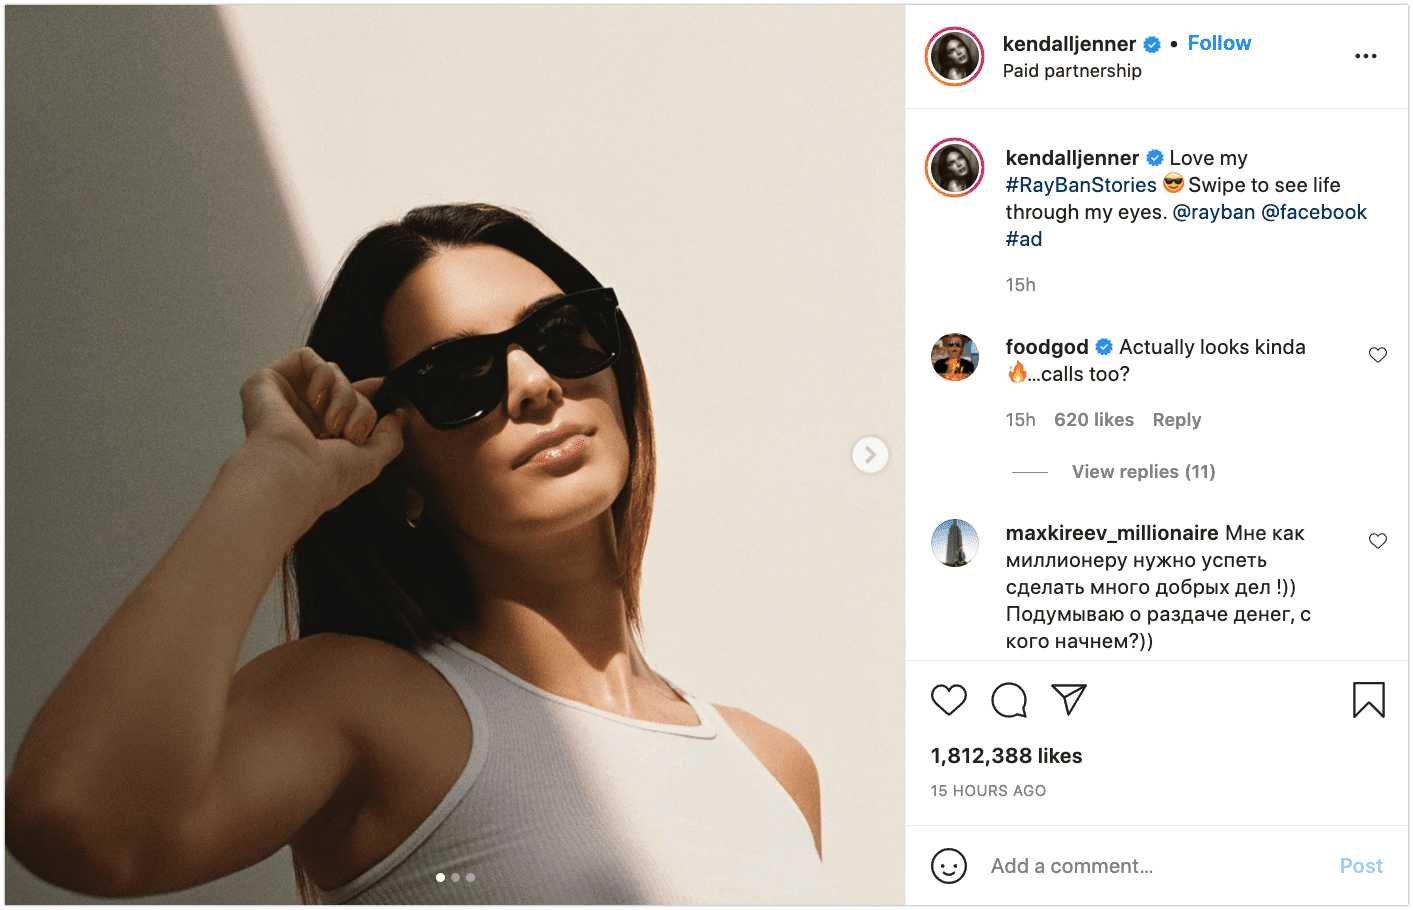 Kendall Jenner sponsored post - native content example